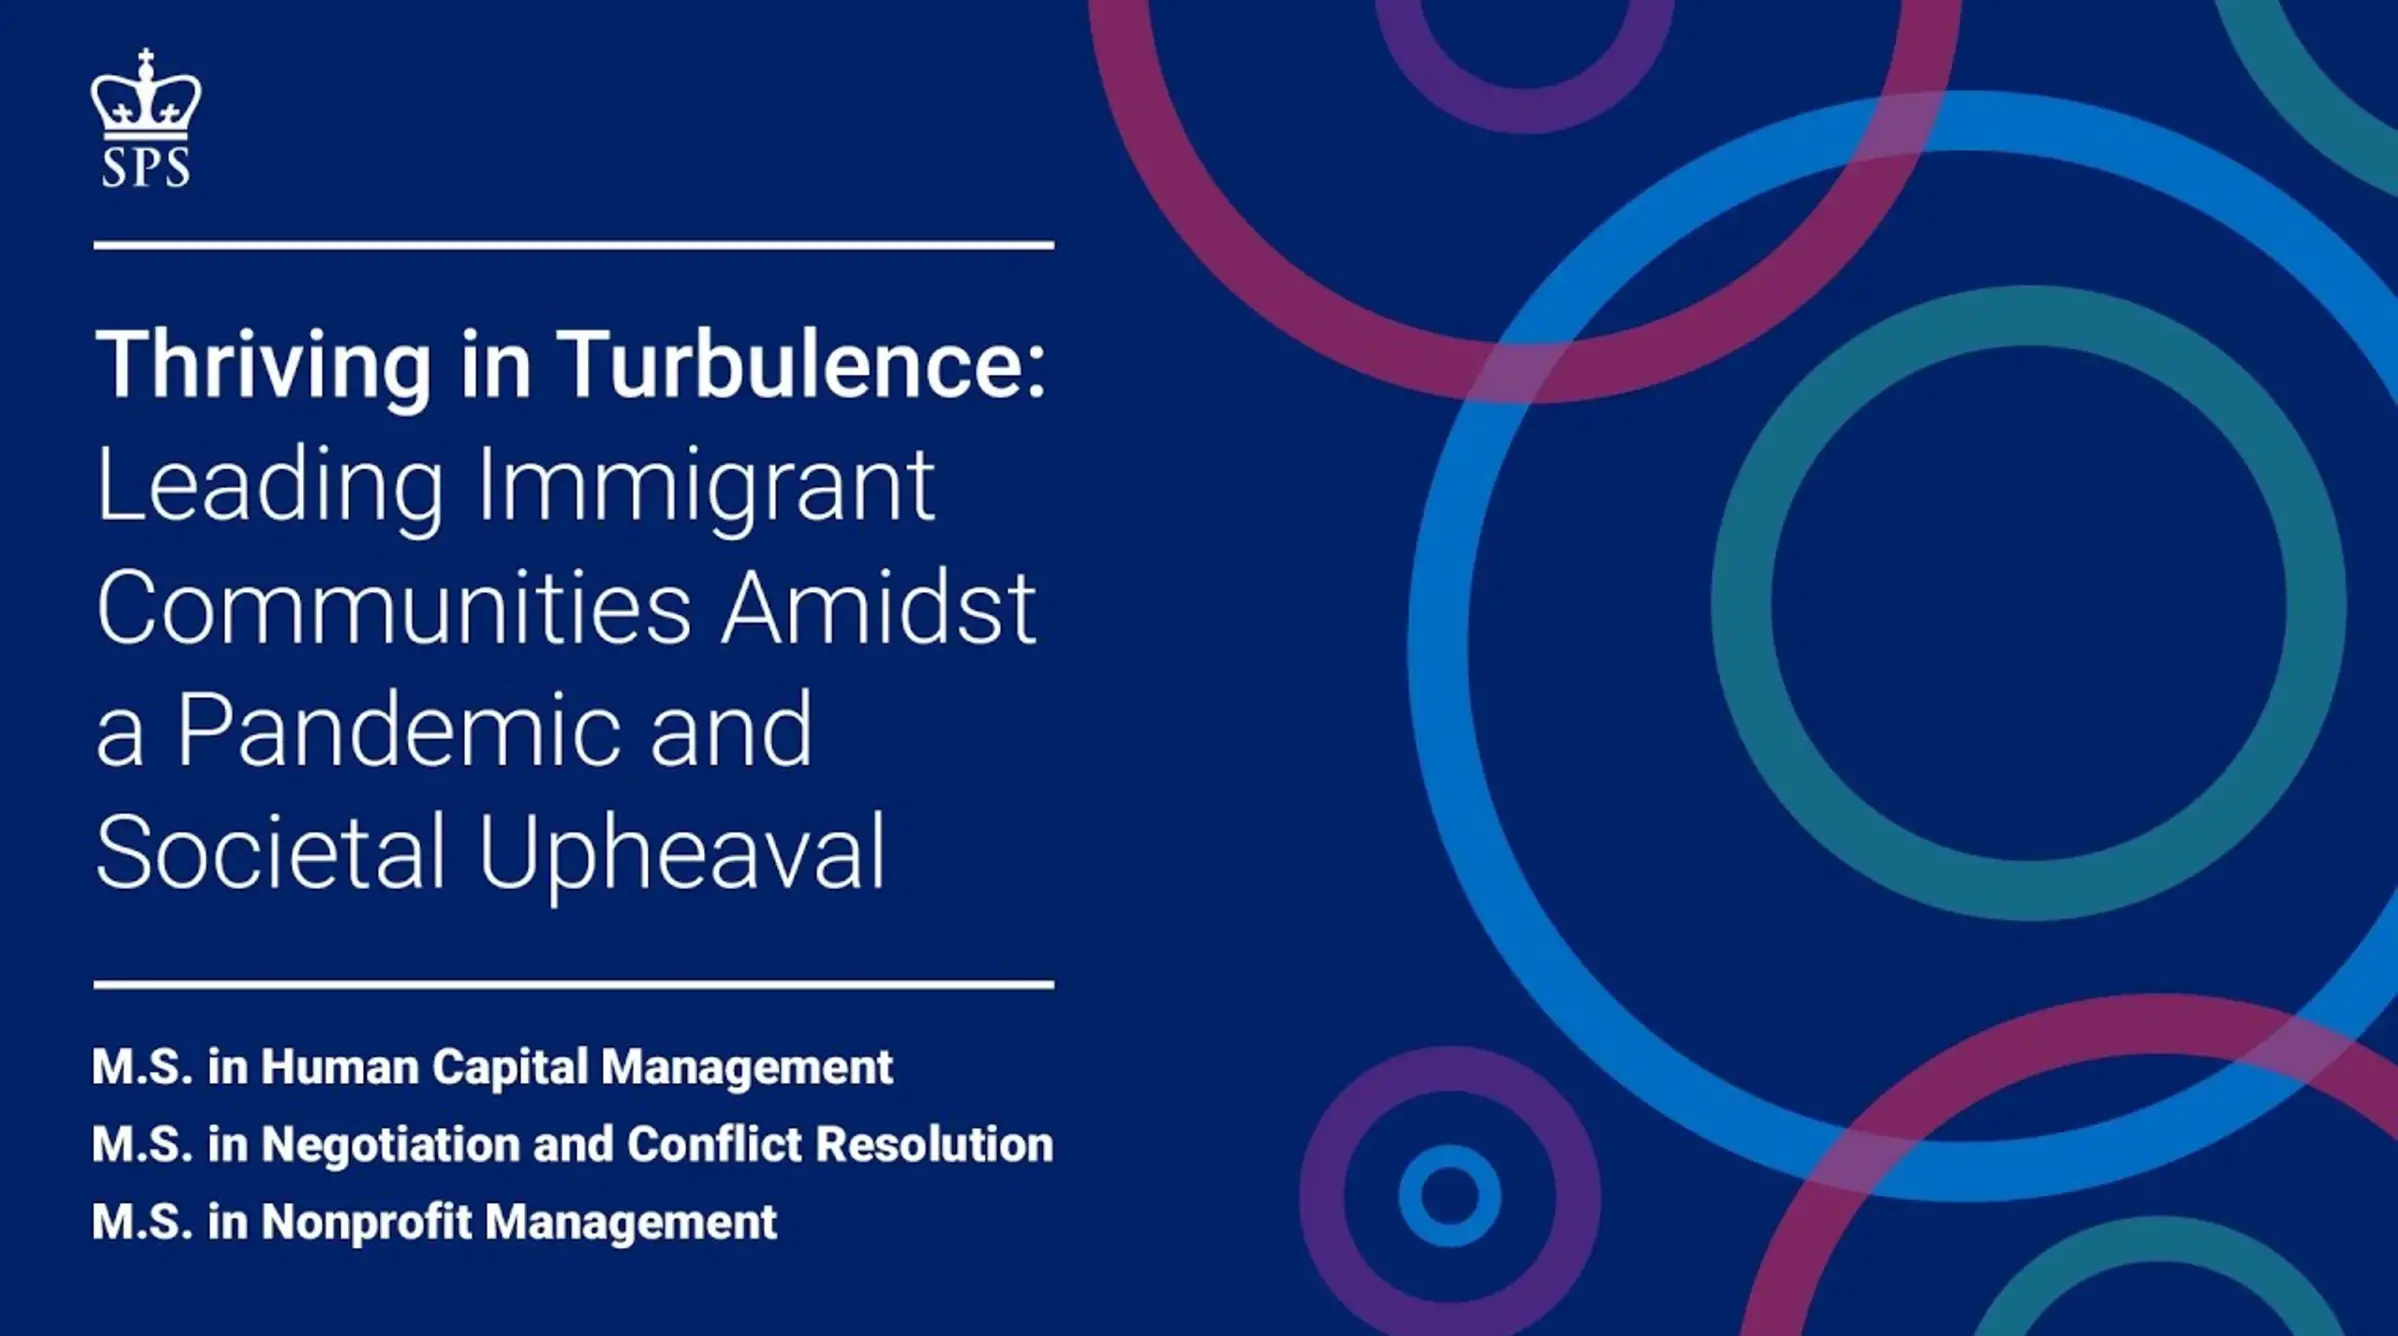 Thriving in Turbulence: Leading Immigrant Communities Amidst a Pandemic and Societal Upheaval